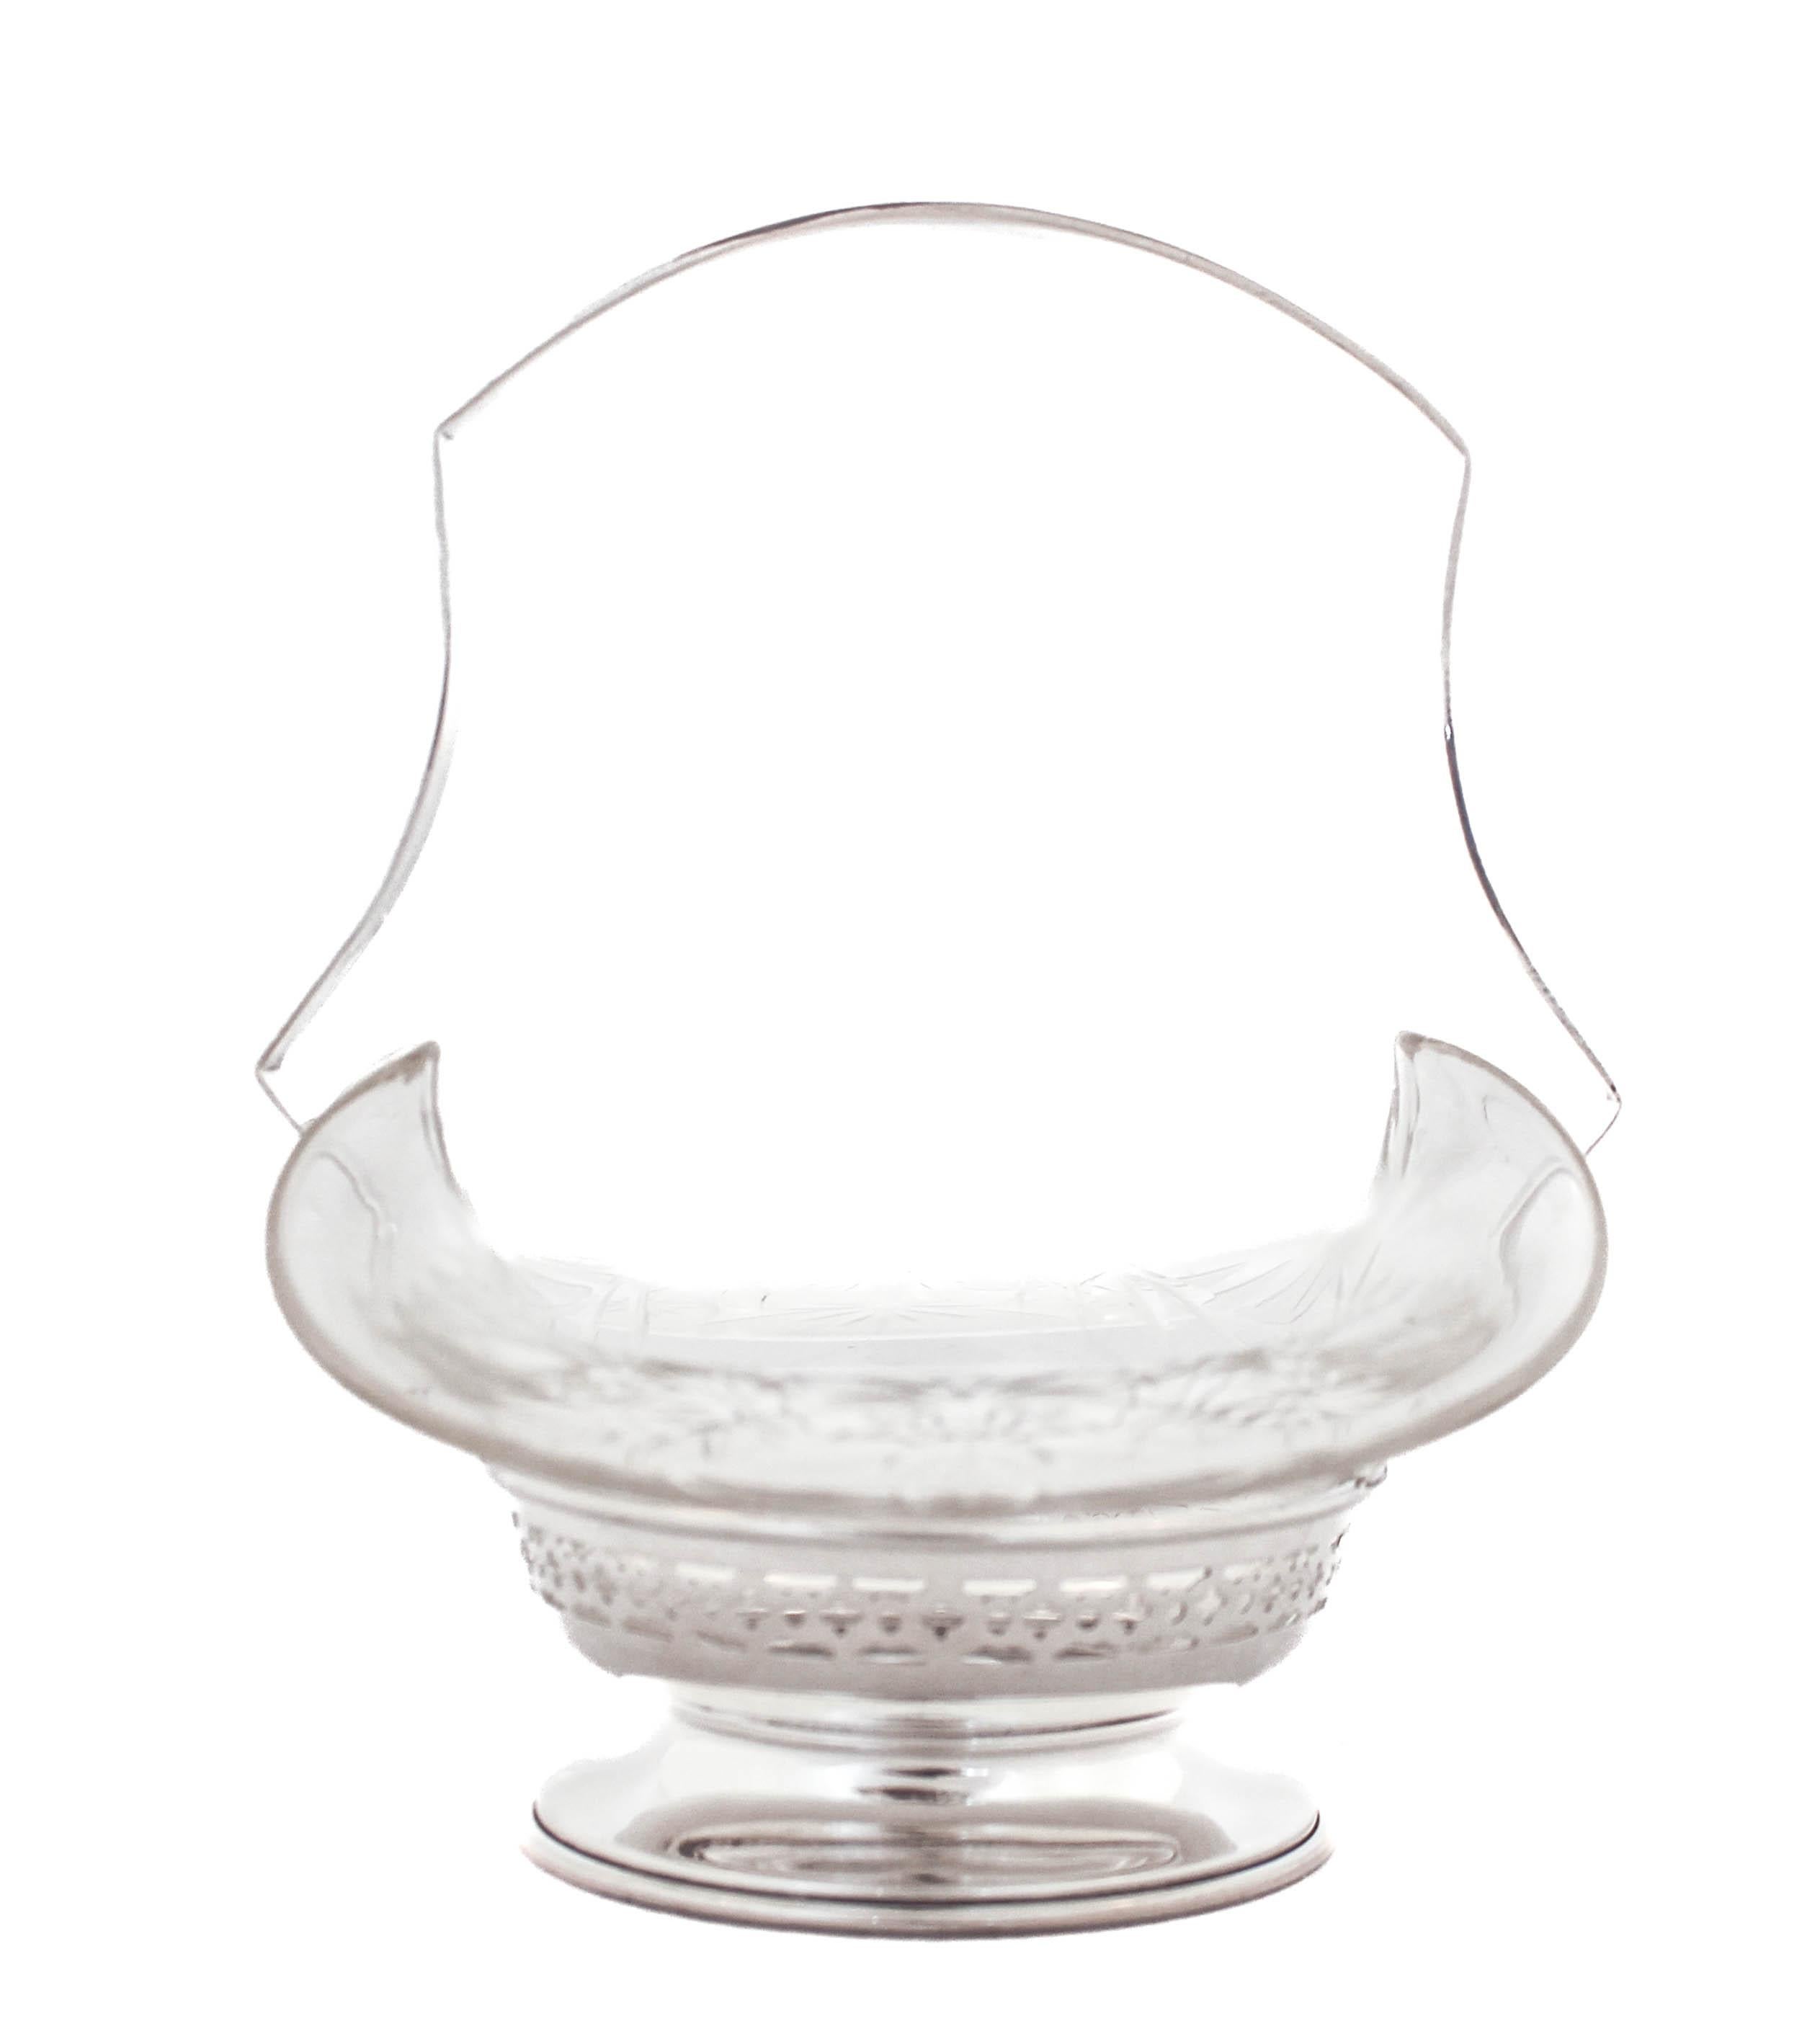 Being offered is a sterling silver basket with a crystal liner.  The sterling part has a reticulated design going around the top and the handle is stationary.  The glass liner fits in snug and conforms to the shape of the handle and has an etched